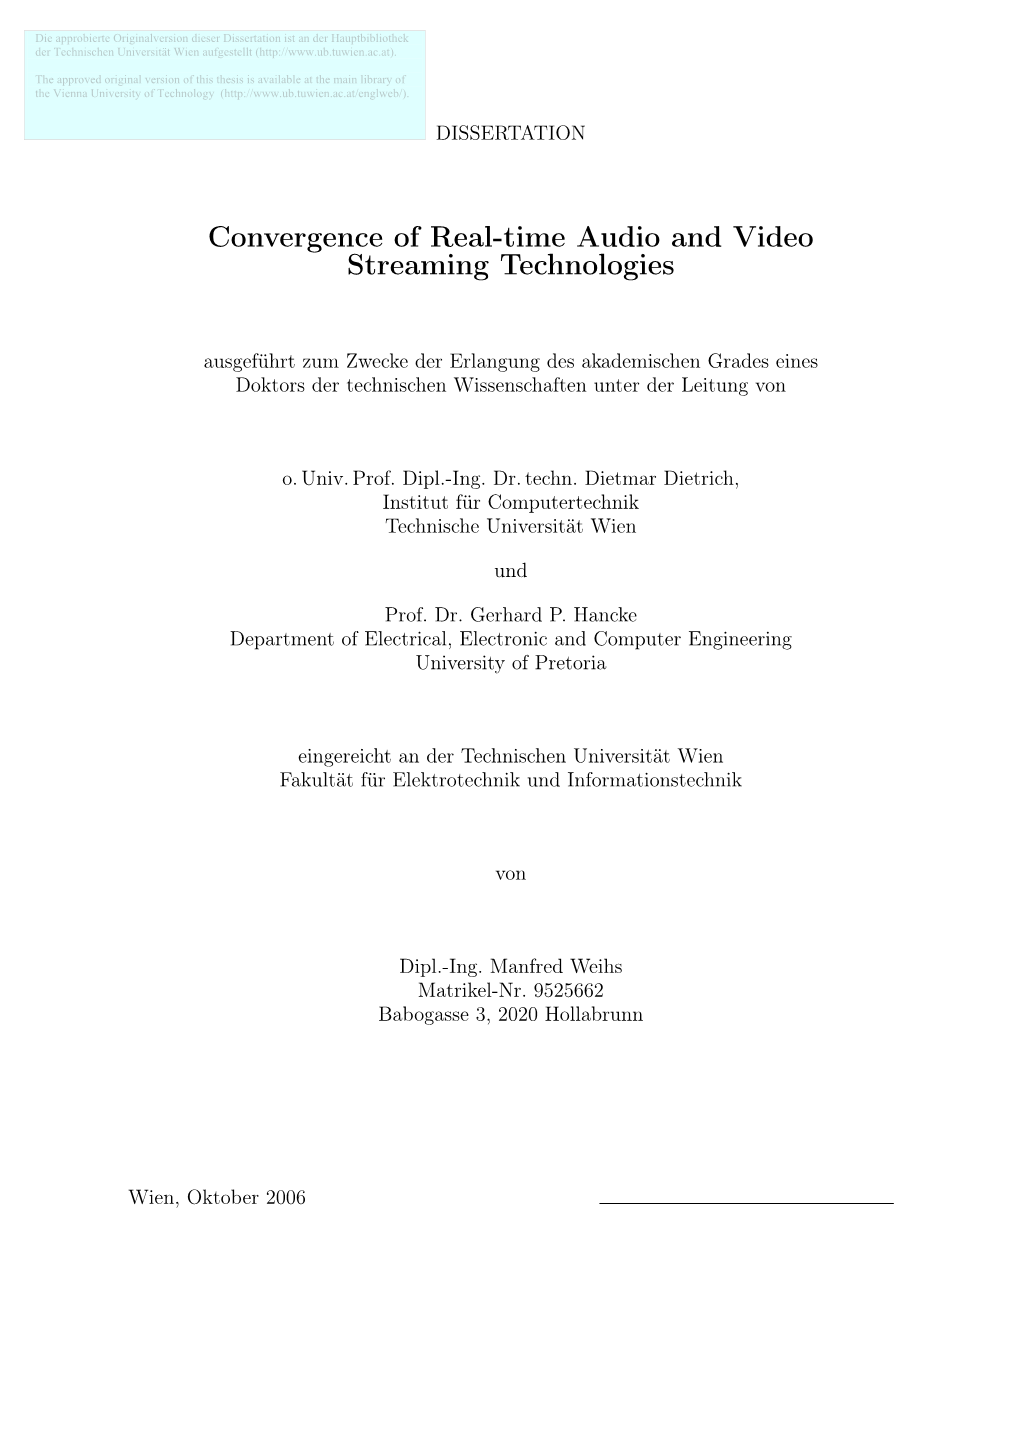 Convergence of Real-Time Audio and Video Streaming Technologies